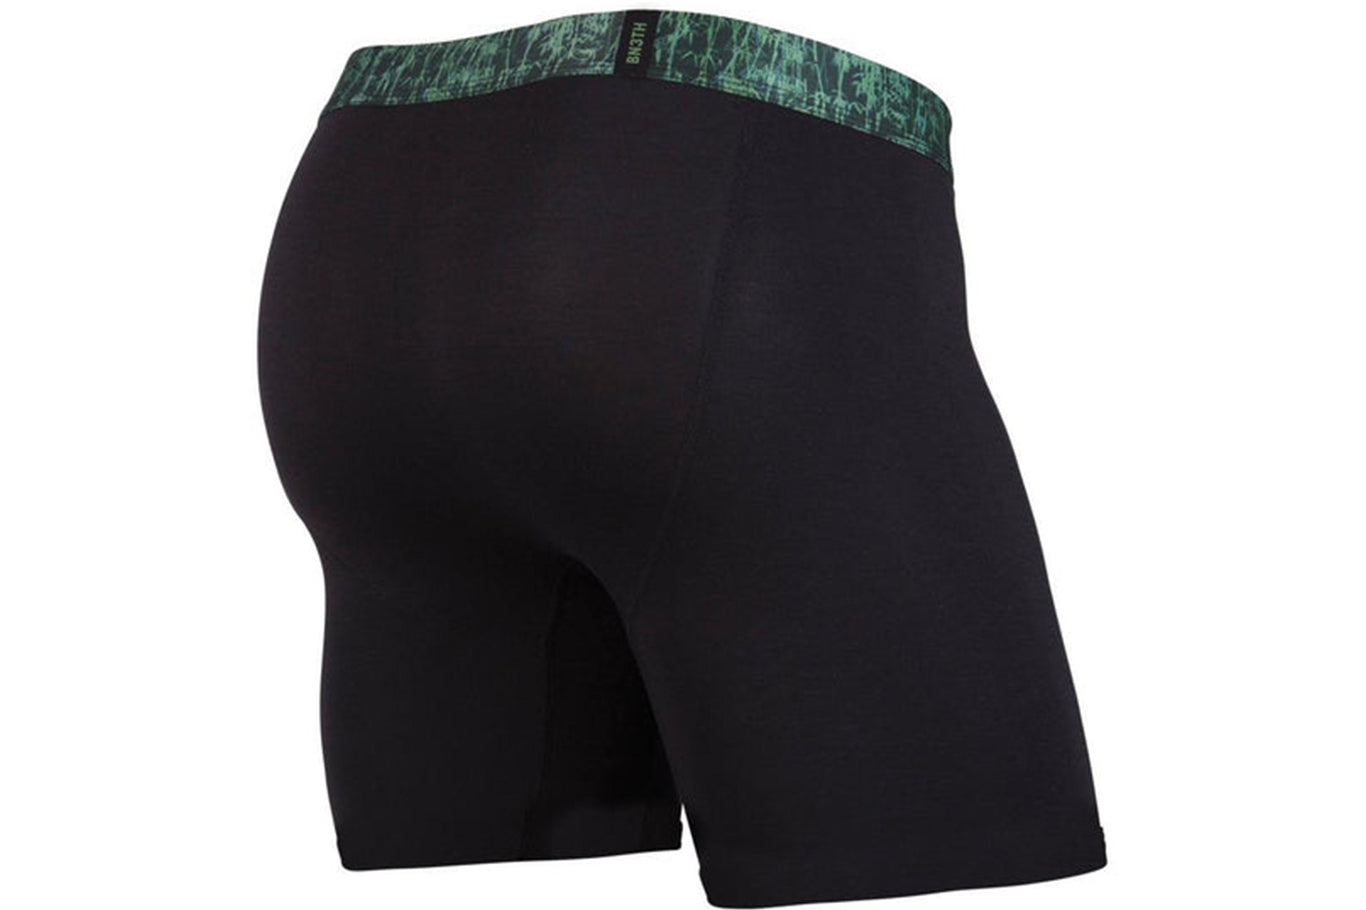 BN3TH Men's Classic Truck Athletic Boxers, Large (2 Pack - Black/Navy)